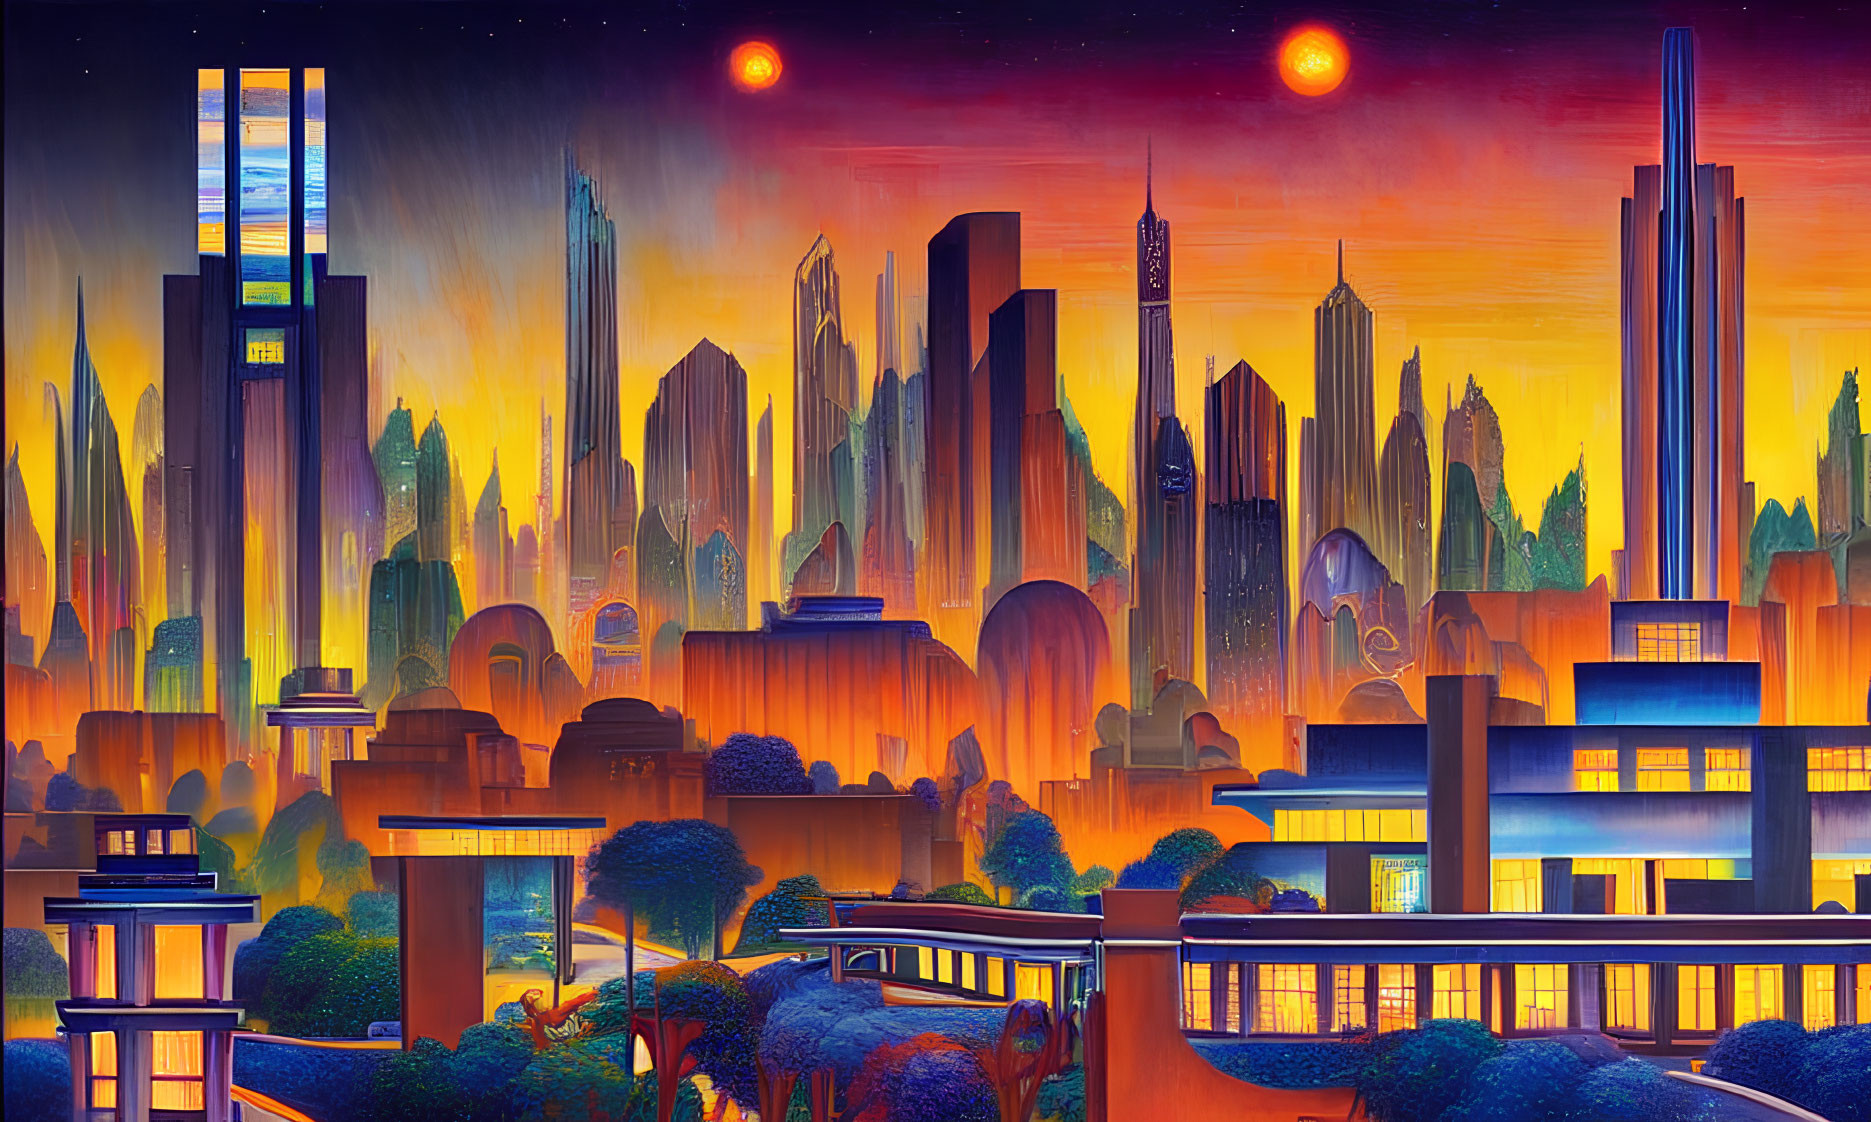 Vibrant sunset cityscape with skyscrapers, green areas, and monorail tracks